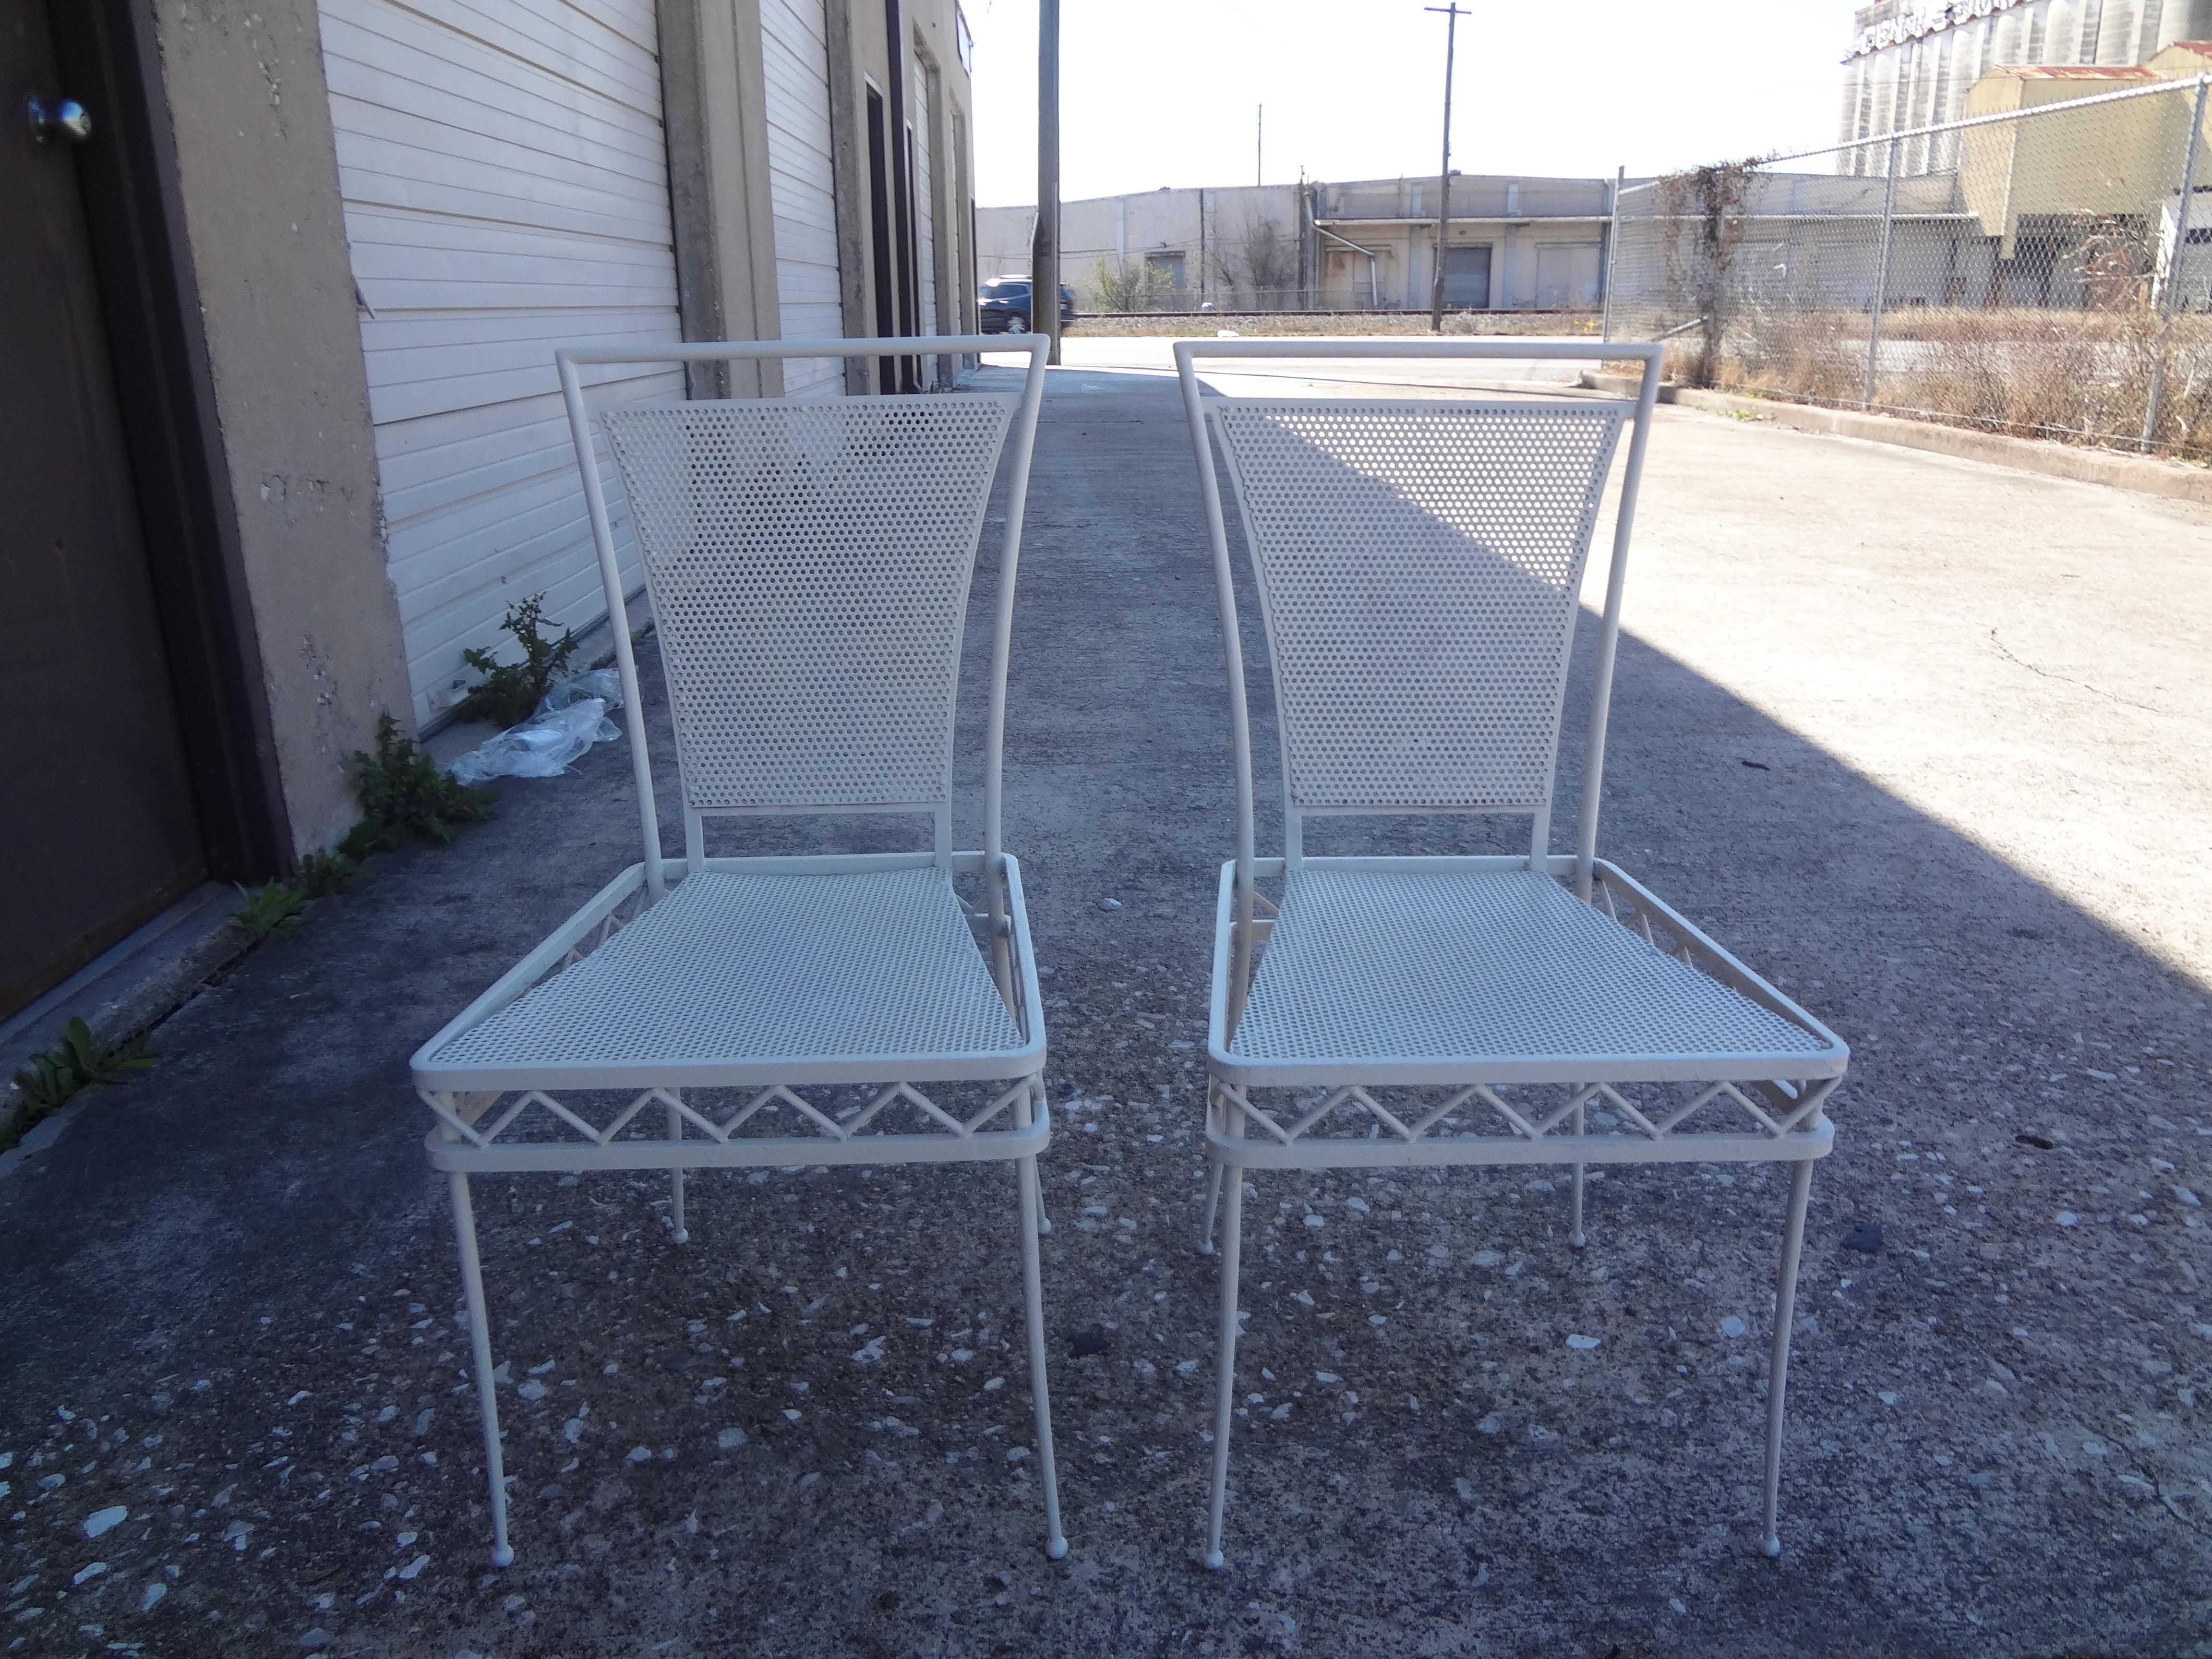 Pair of French Mathieu Matégot style white wrought iron chairs. These stunning French Rivera iron chairs can be used indoors or outdoors as garden chairs.
They are white. The photograph looks a bit light blue.
These chairs could easily be painted in